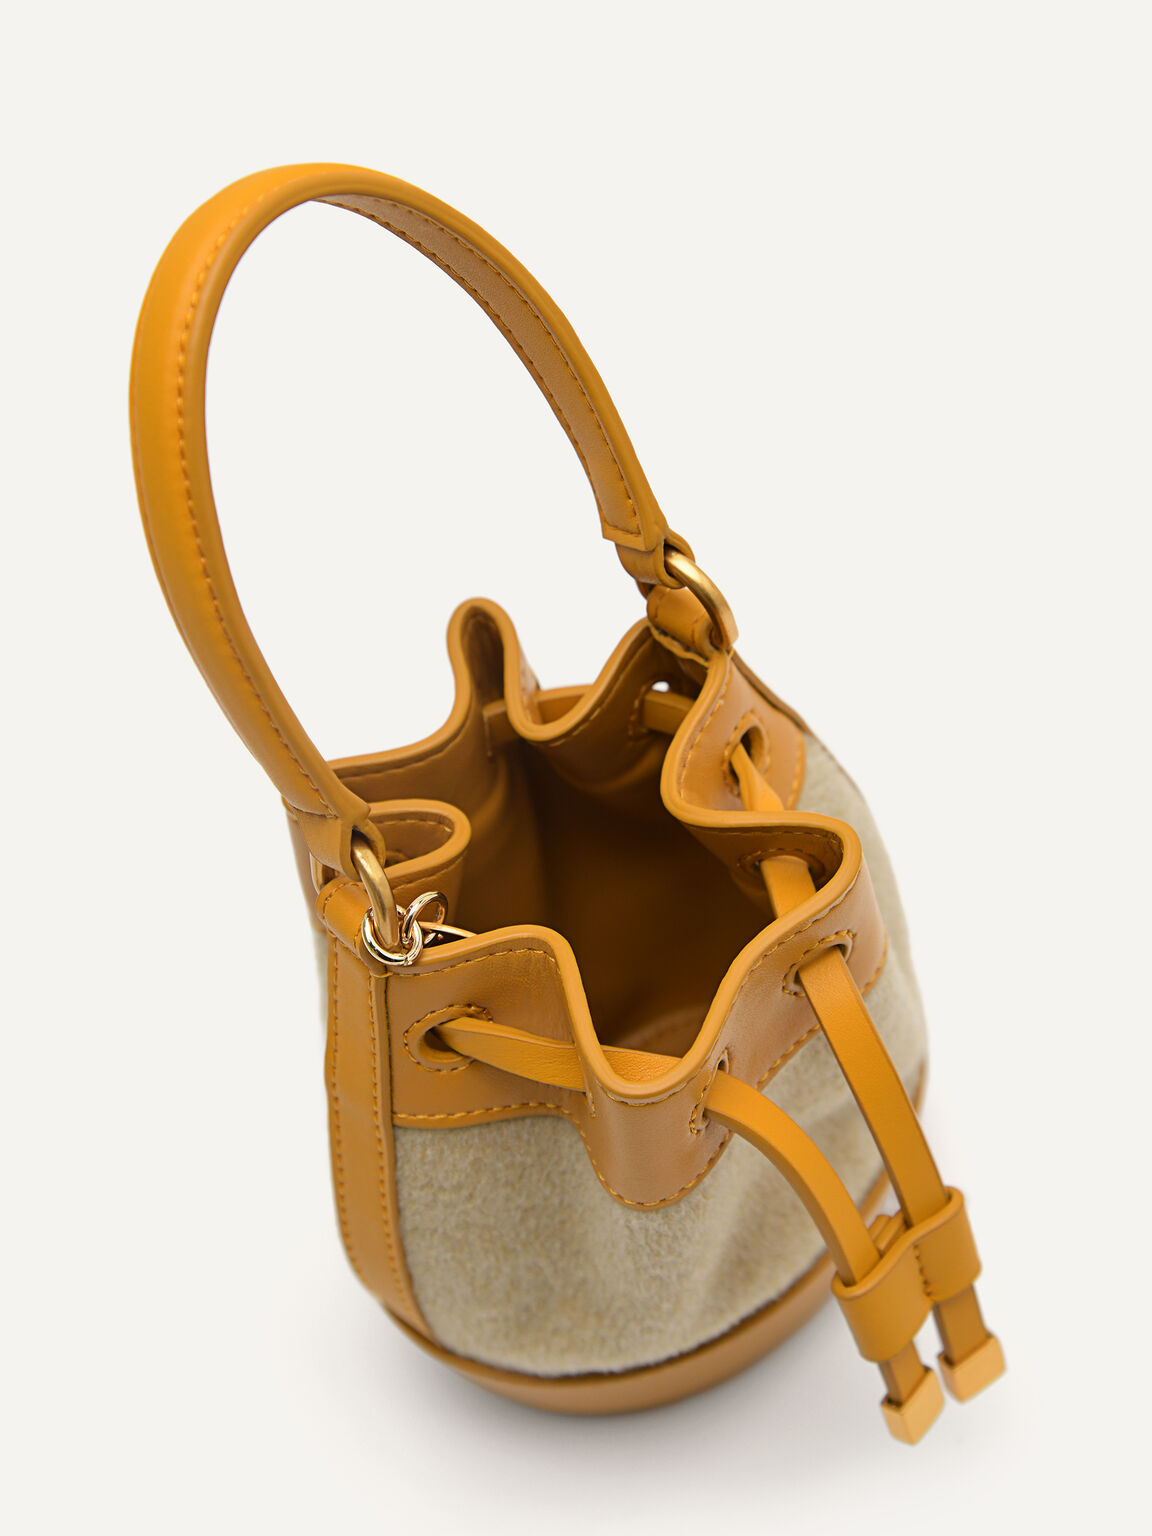 Mini Bucket Pouch with Long Strap, Mustard